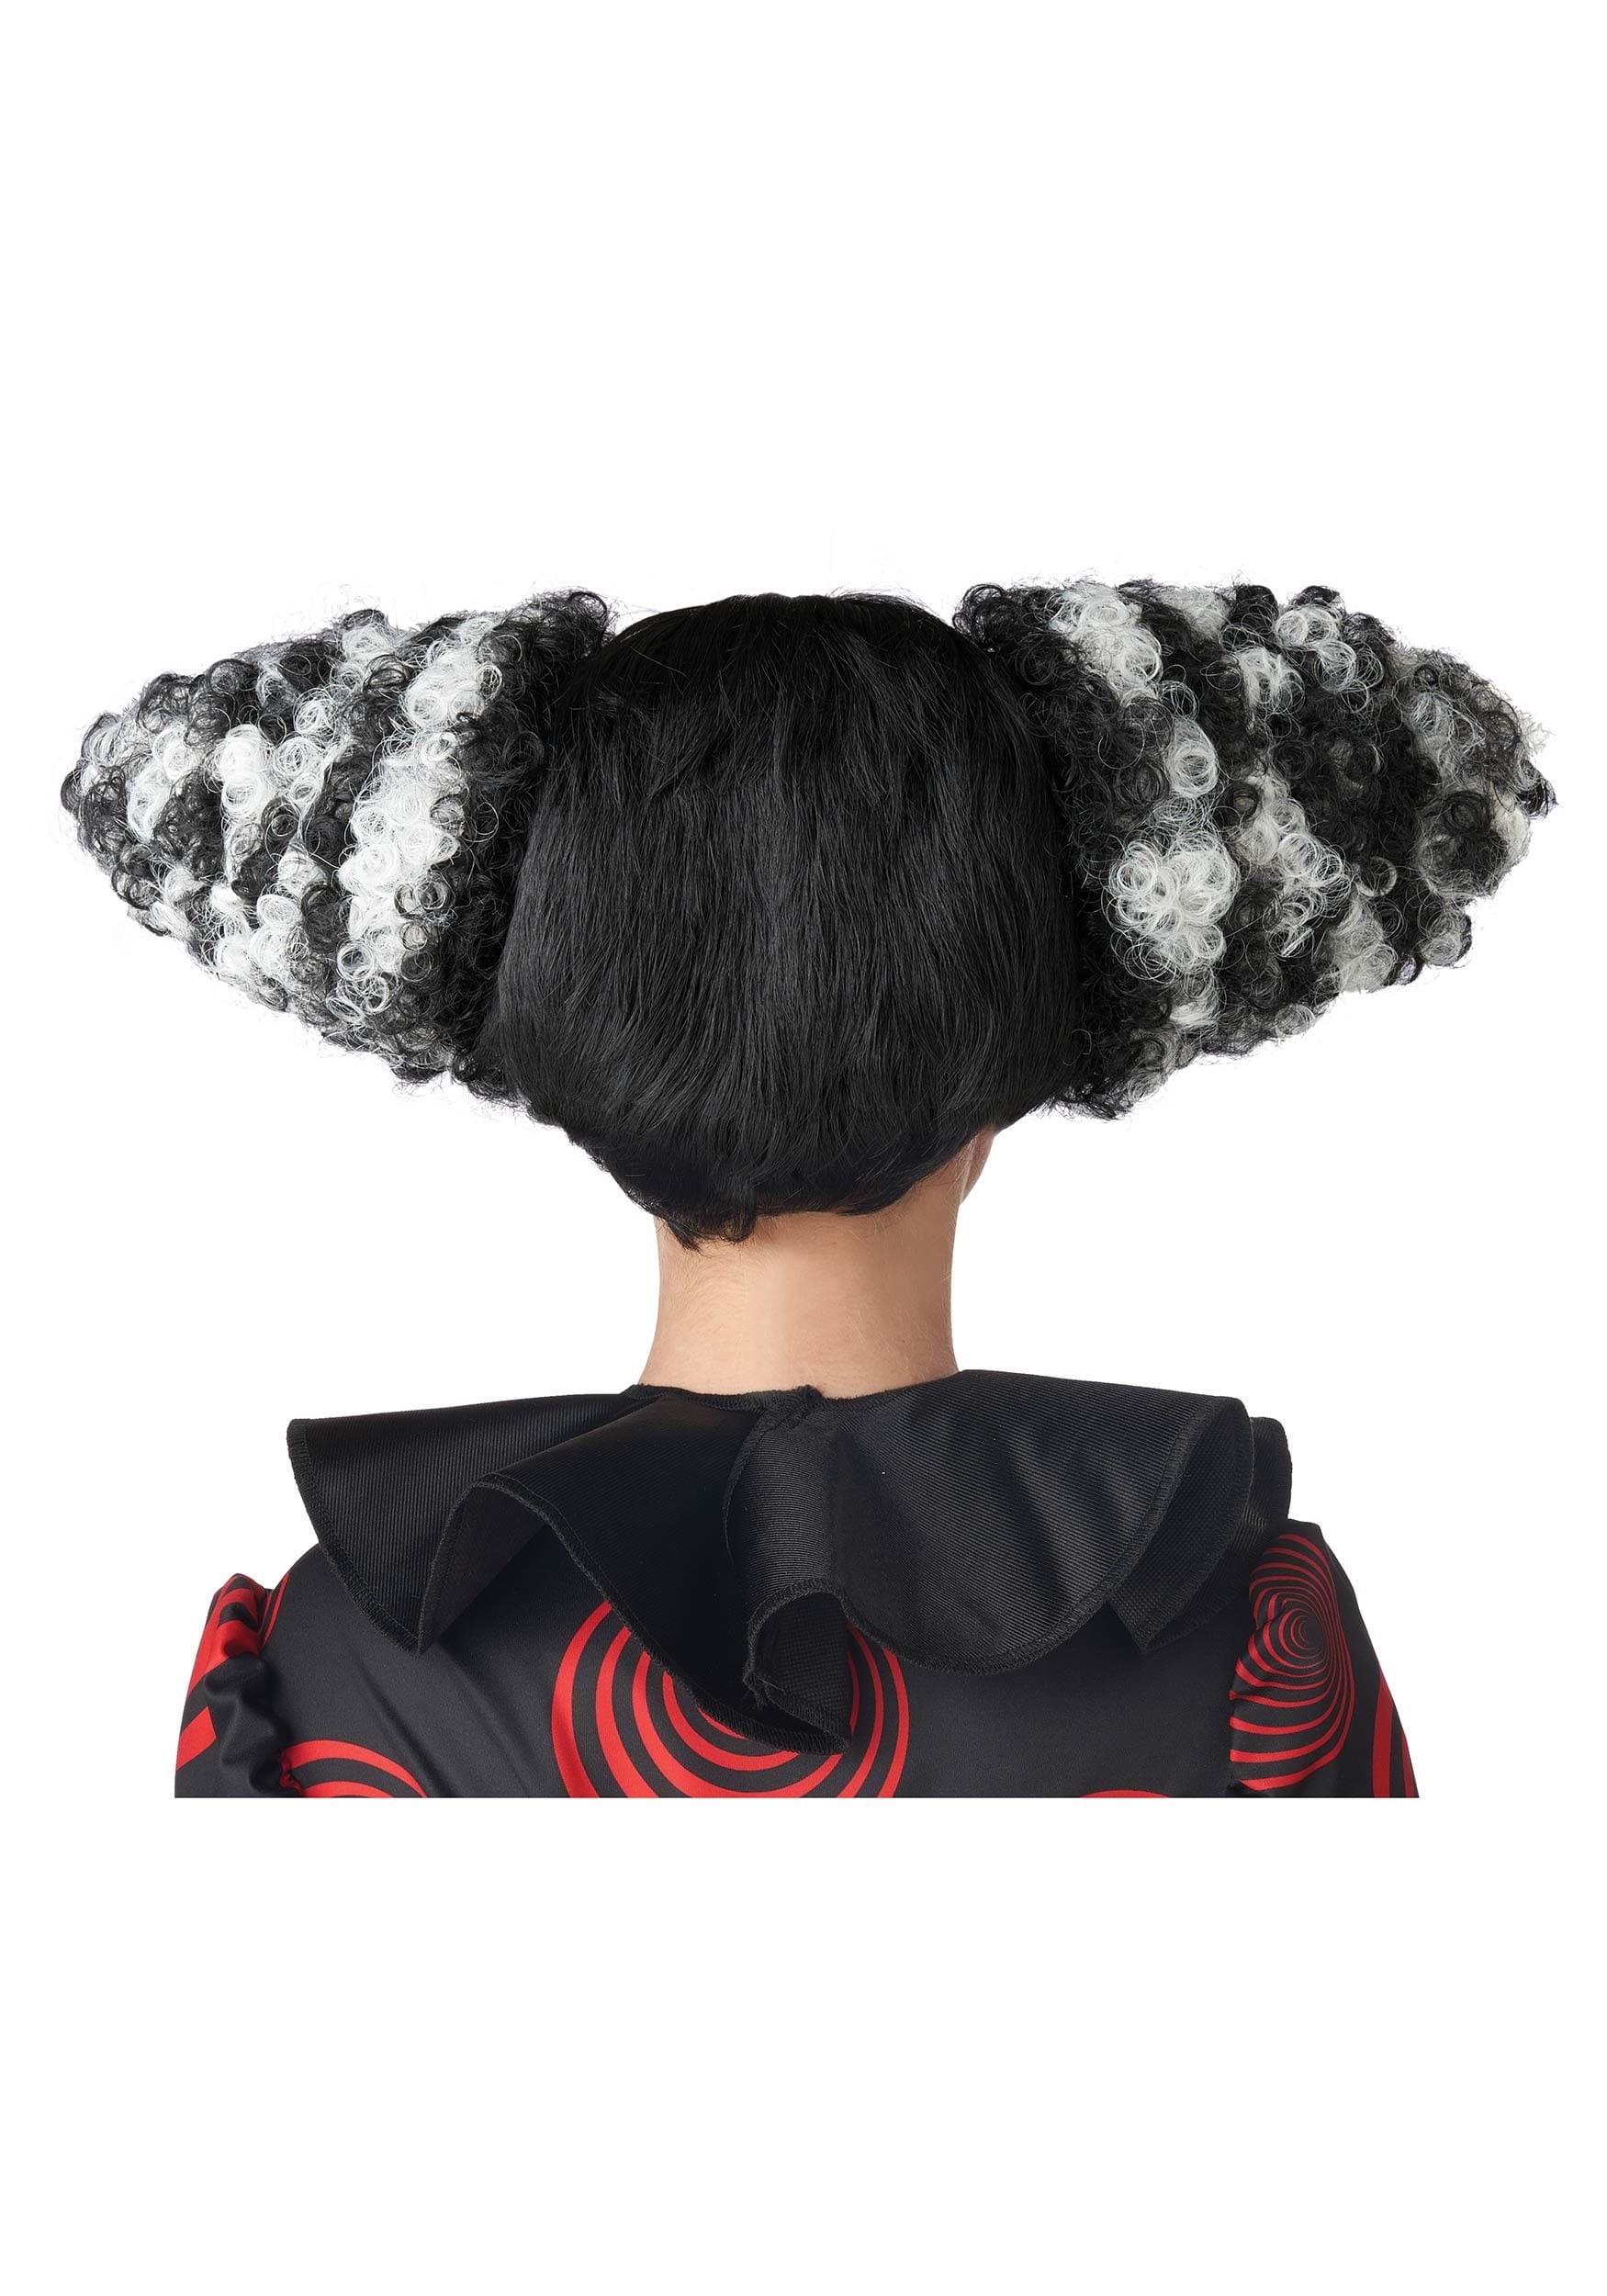 Black And White Funhouse Clown Wig